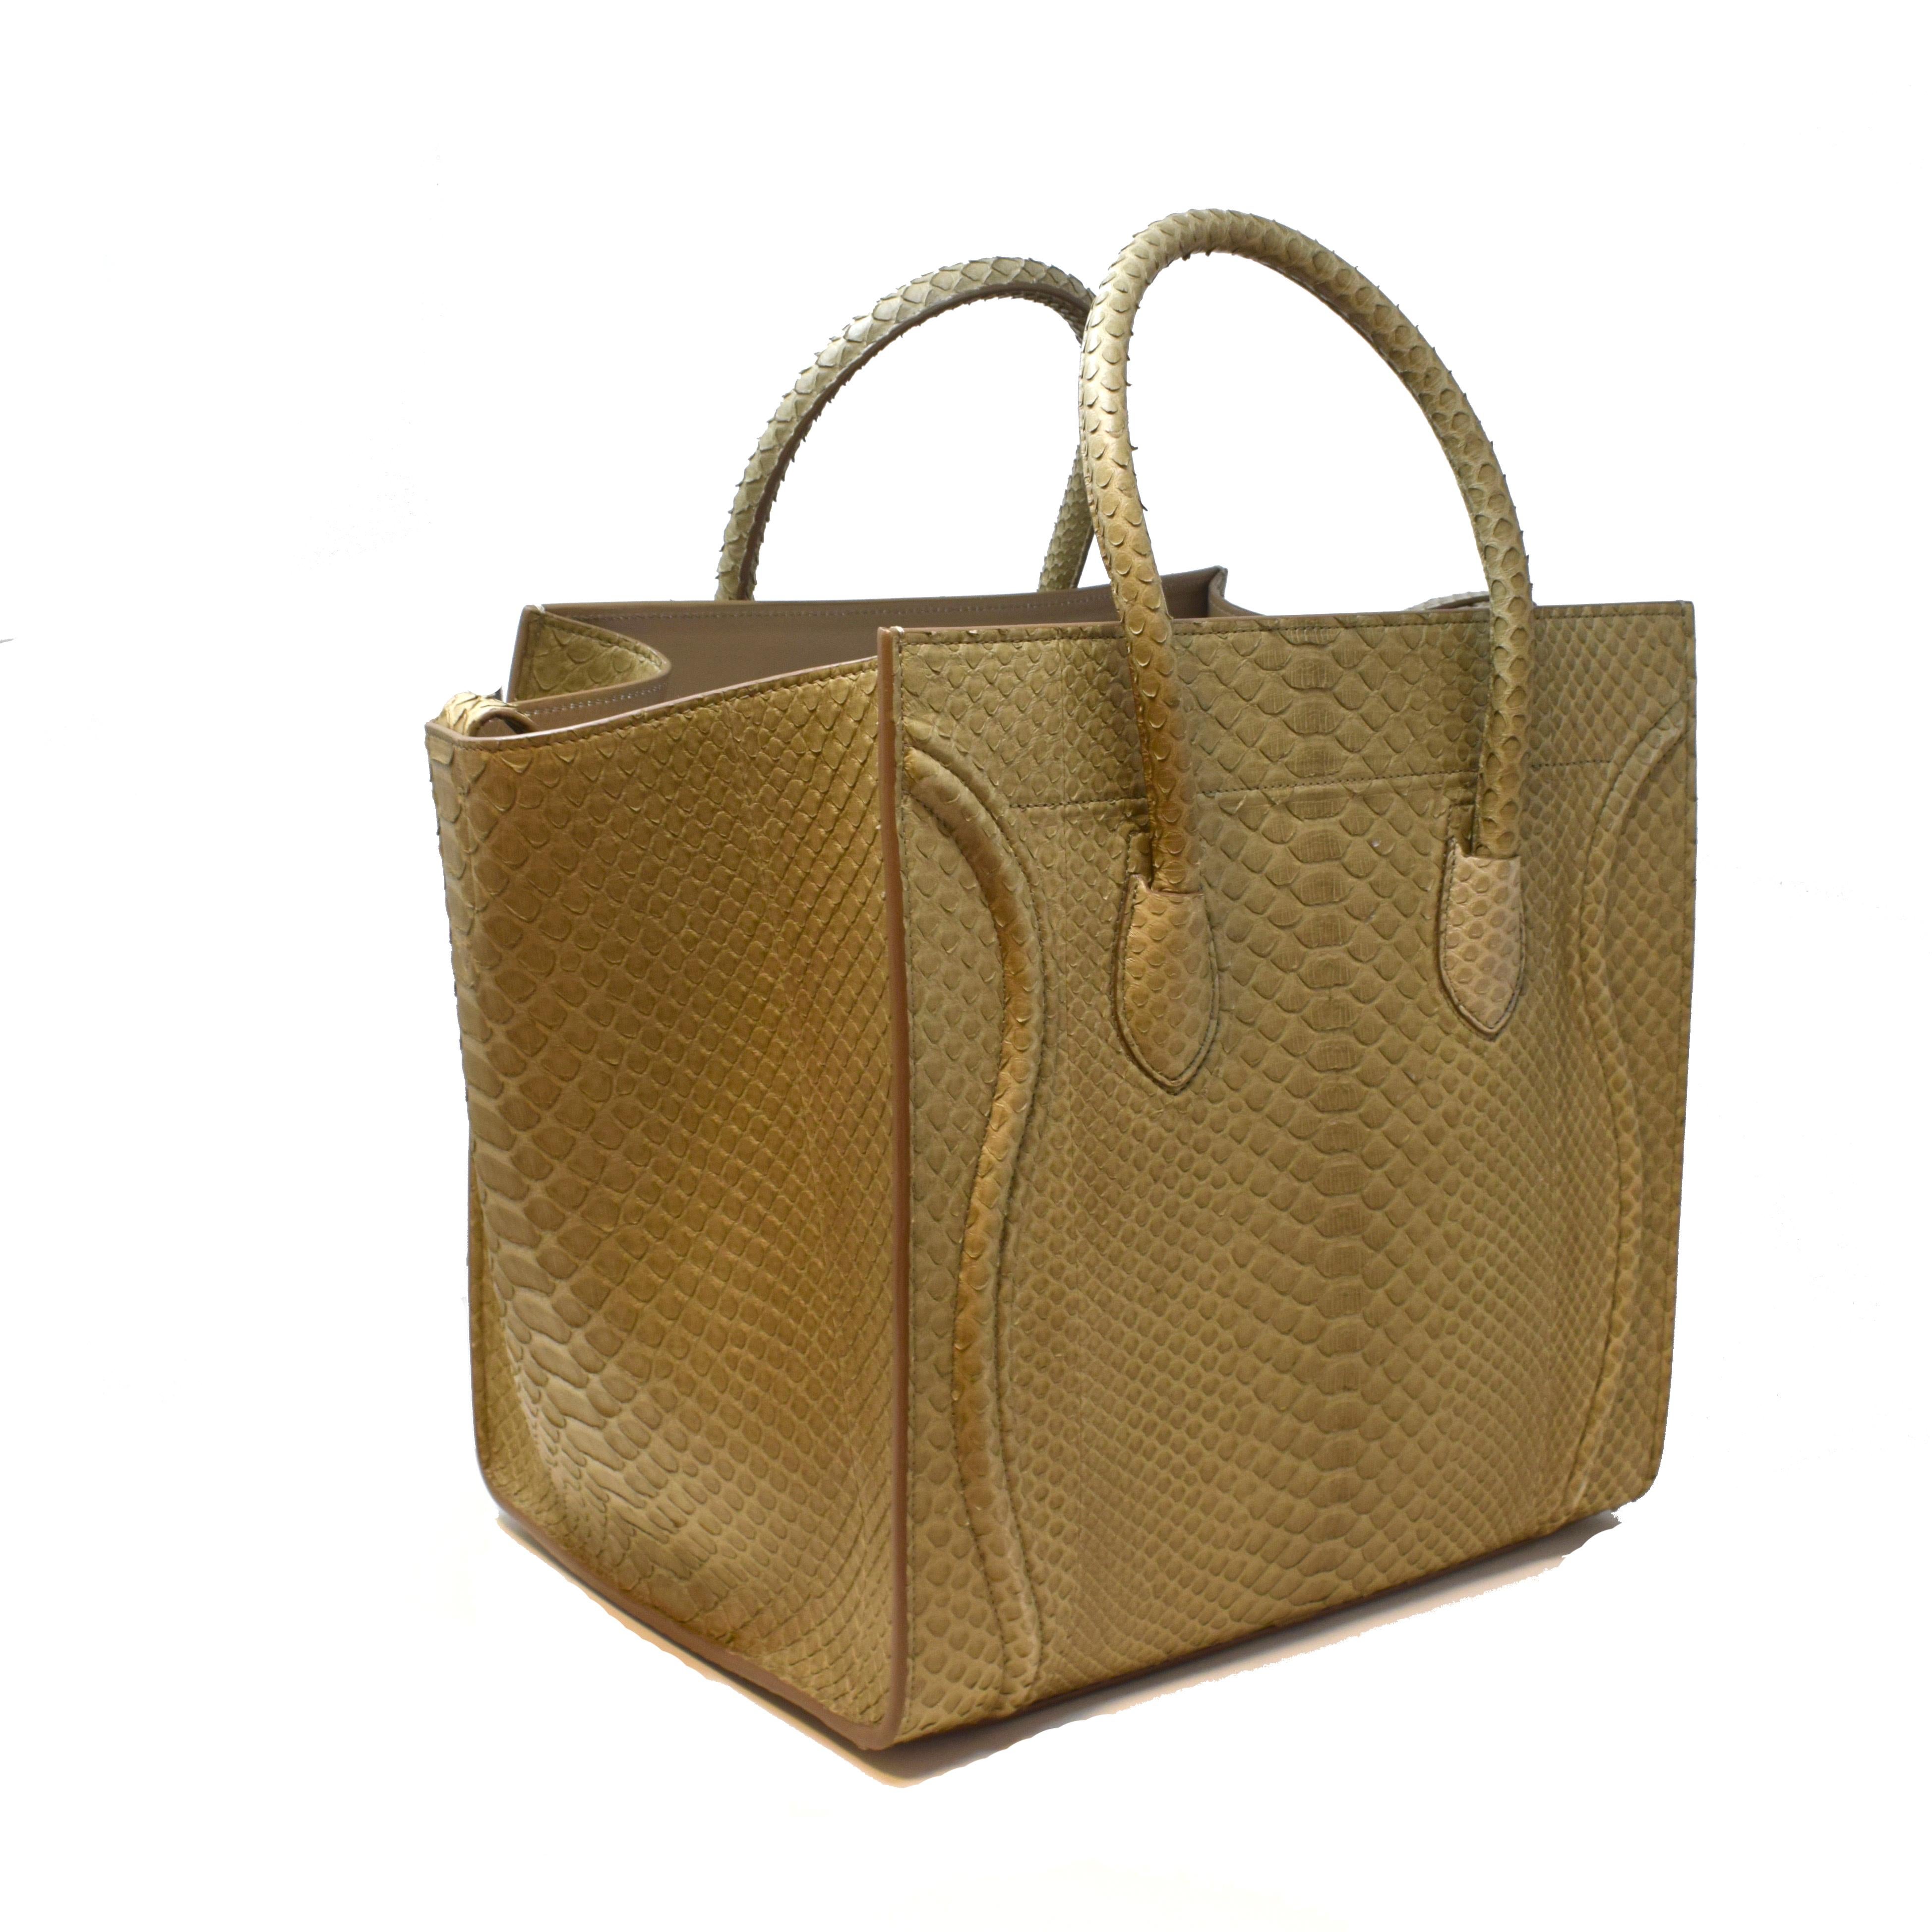 Brilliance Jewels, Miami
Questions? Call Us Anytime!
786,482,8100

Brand: Celine

Model Name: Phantom Luggage

Material: Python Snakeskin

Width: 30 inches

Height: 30 inches

Depth: 9.5 inches

Handle Drop: 5 inches

Condition: Minor Wear and Tear